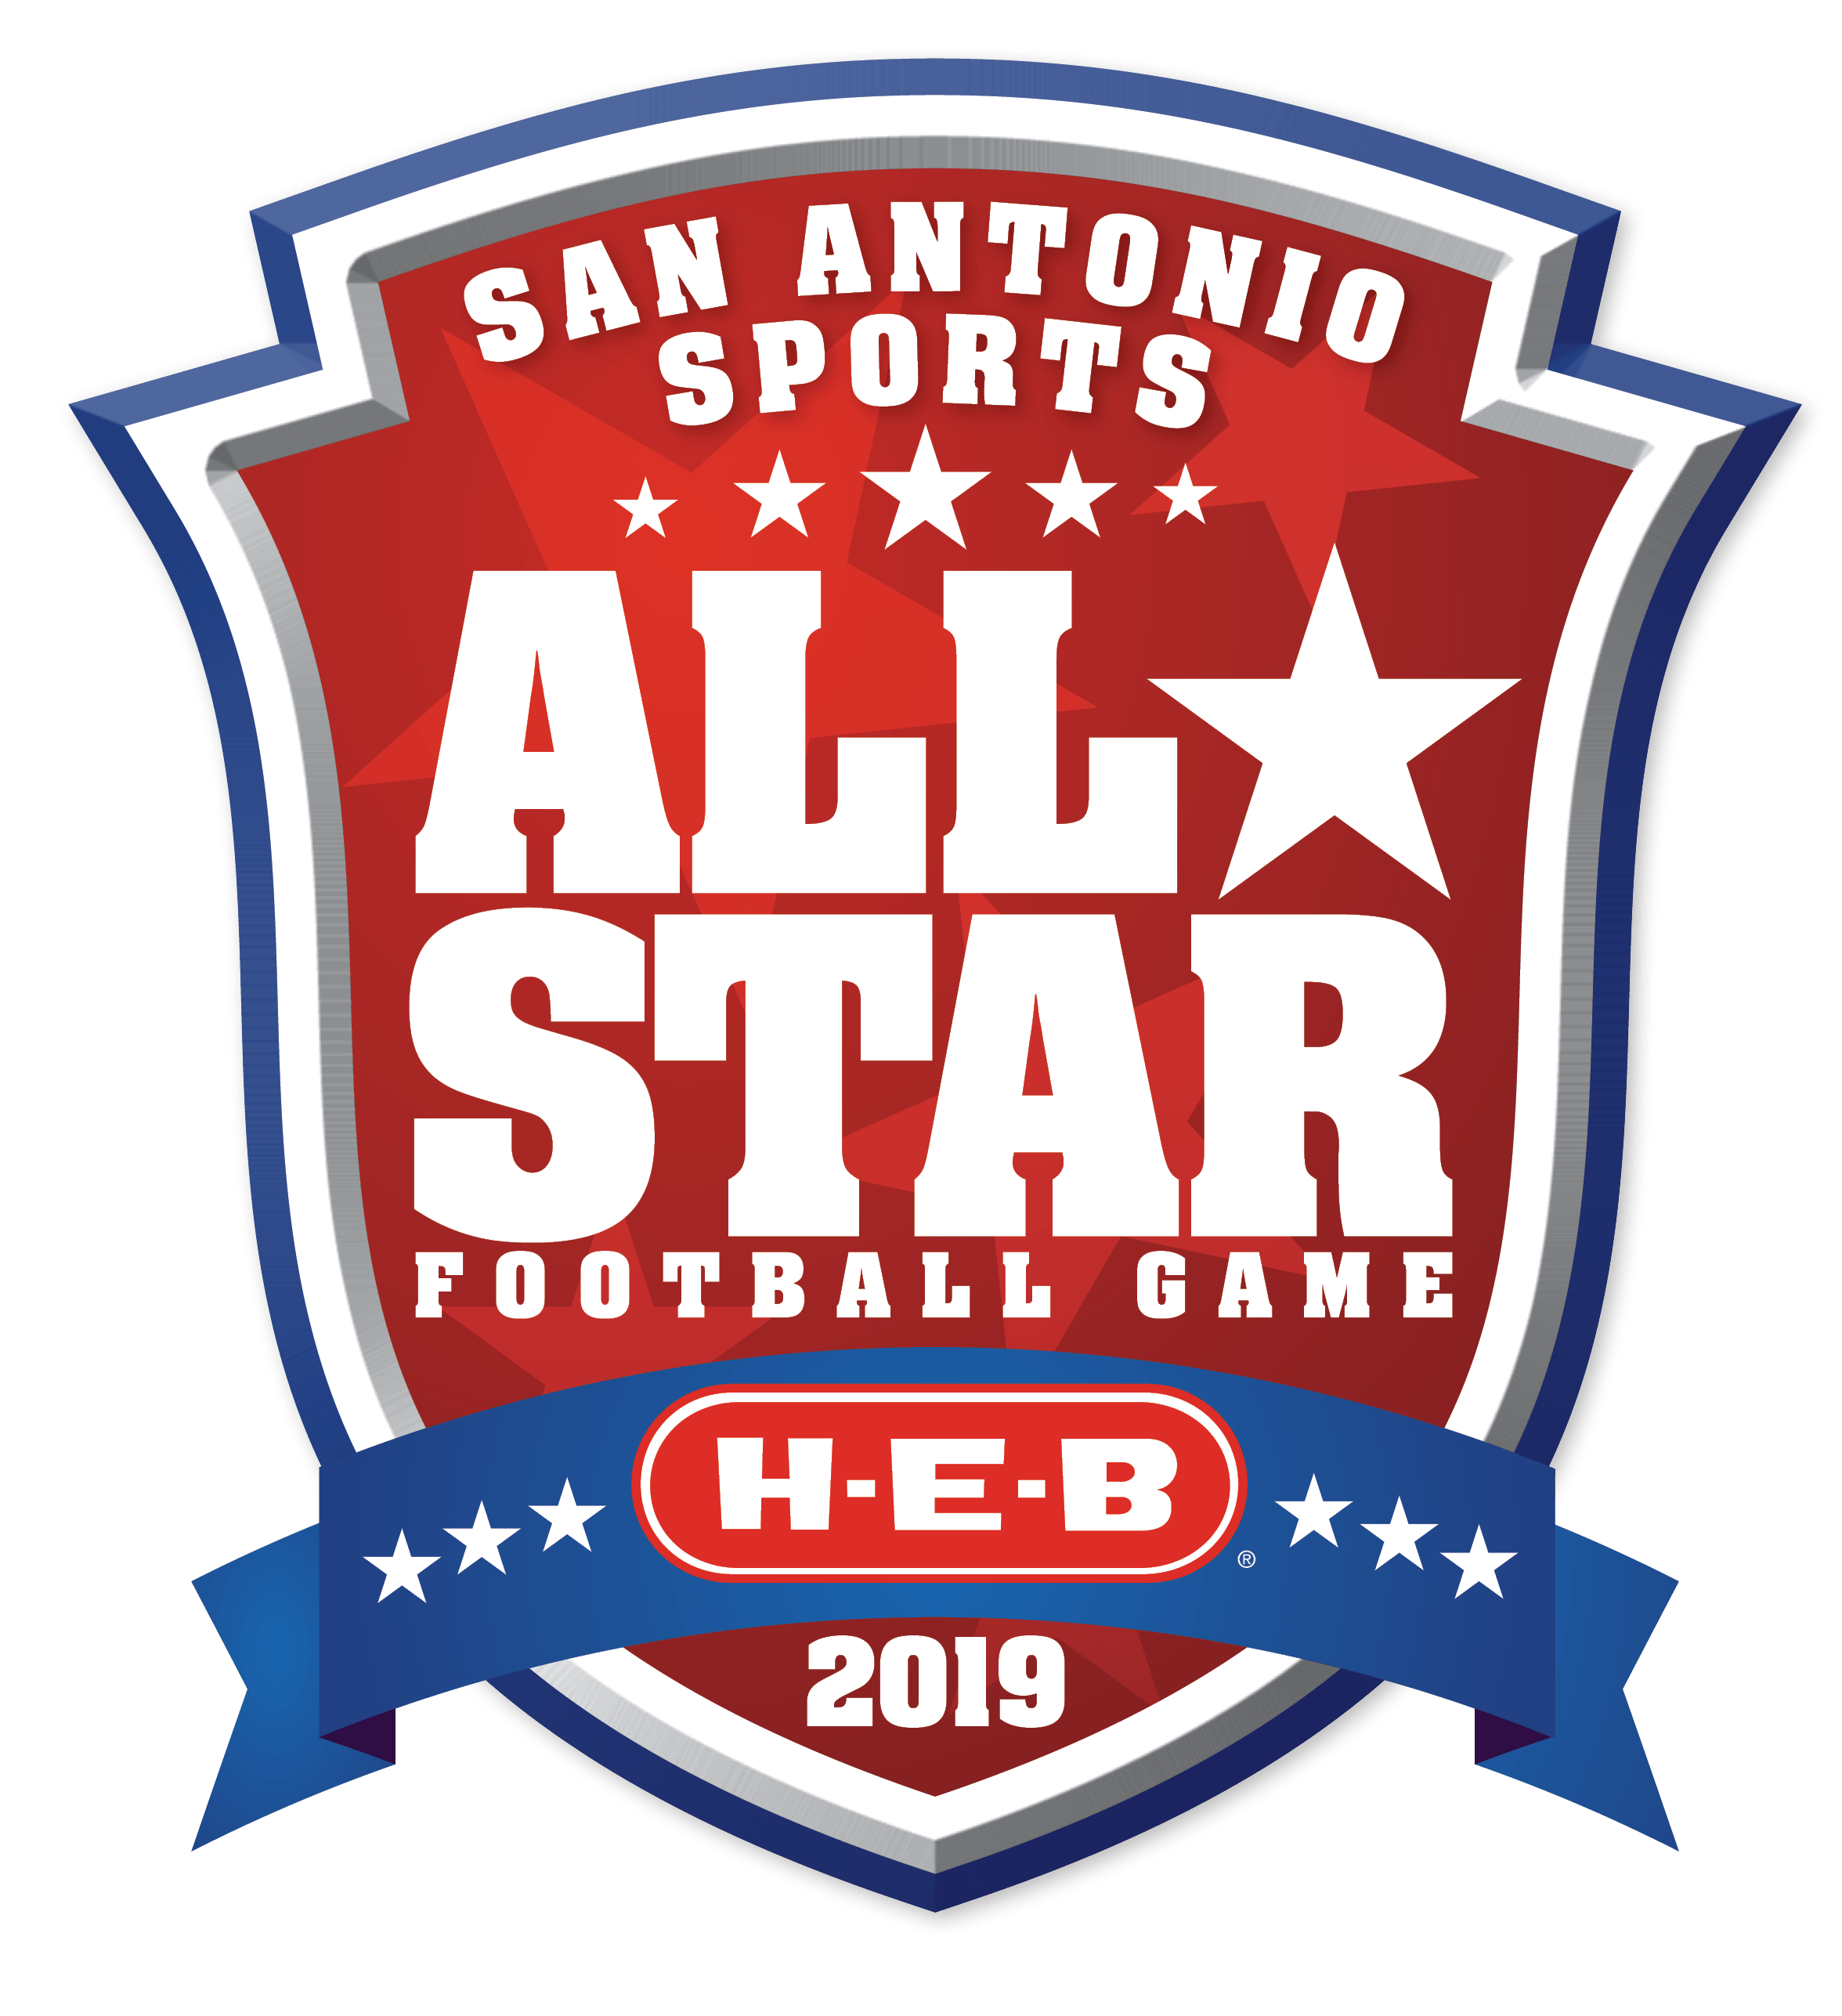 Red H Football Logo - PLAYERS ANNOUNCED FOR 2019 SAN ANTONIO SPORTS ALL-STAR FOOTBALL GAME ...